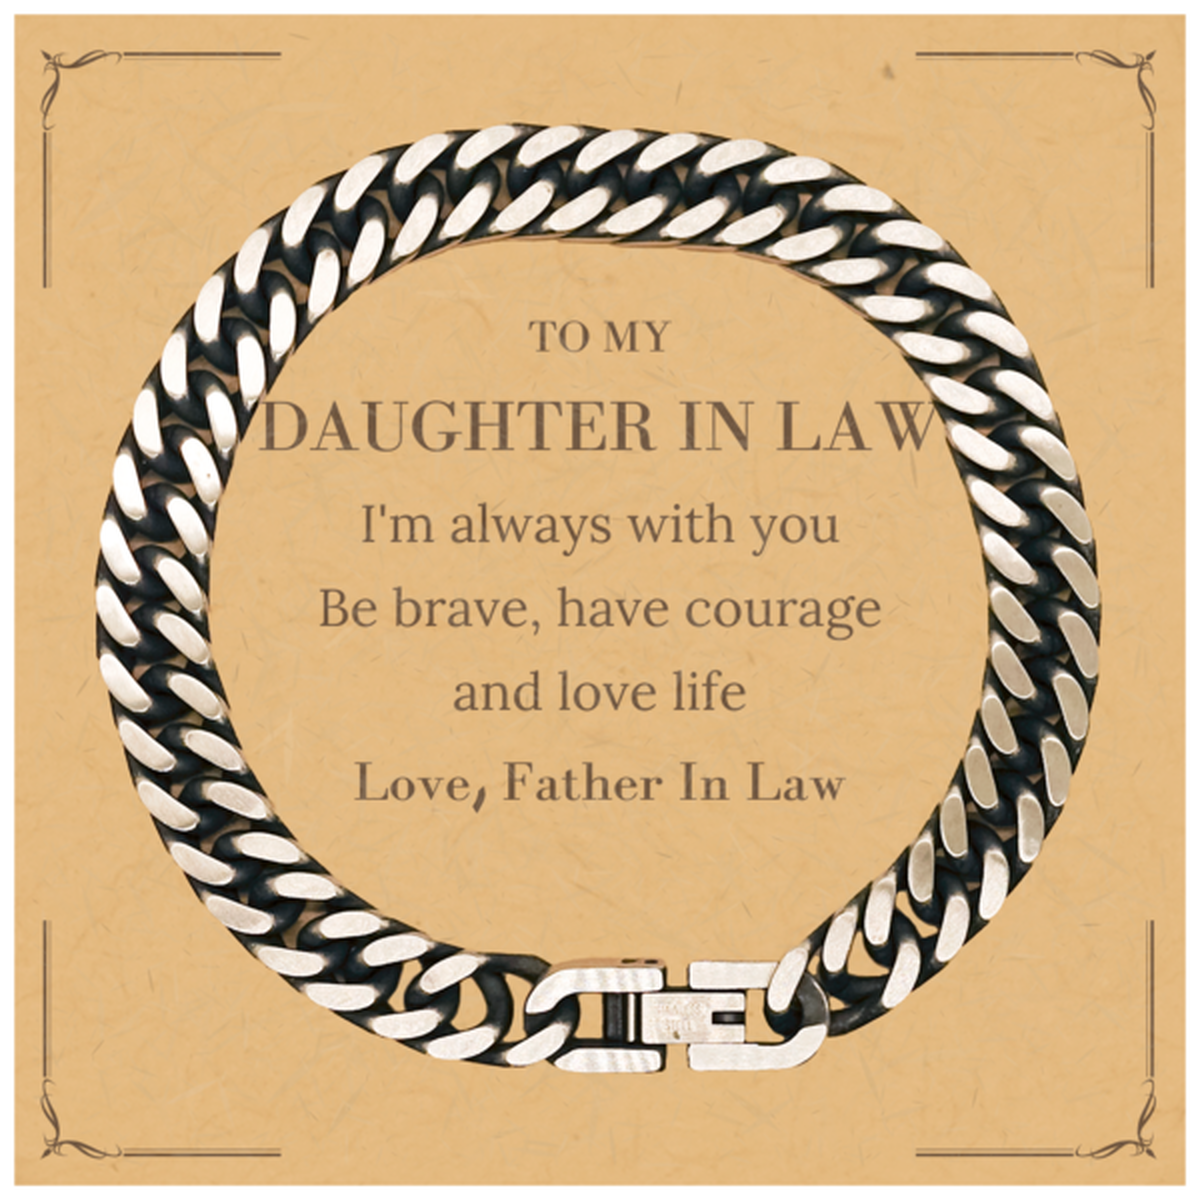 To My Daughter In Law Gifts from Father In Law, Unique Cuban Link Chain Bracelet Inspirational Christmas Birthday Graduation Gifts for Daughter In Law I'm always with you. Be brave, have courage and love life. Love, Father In Law